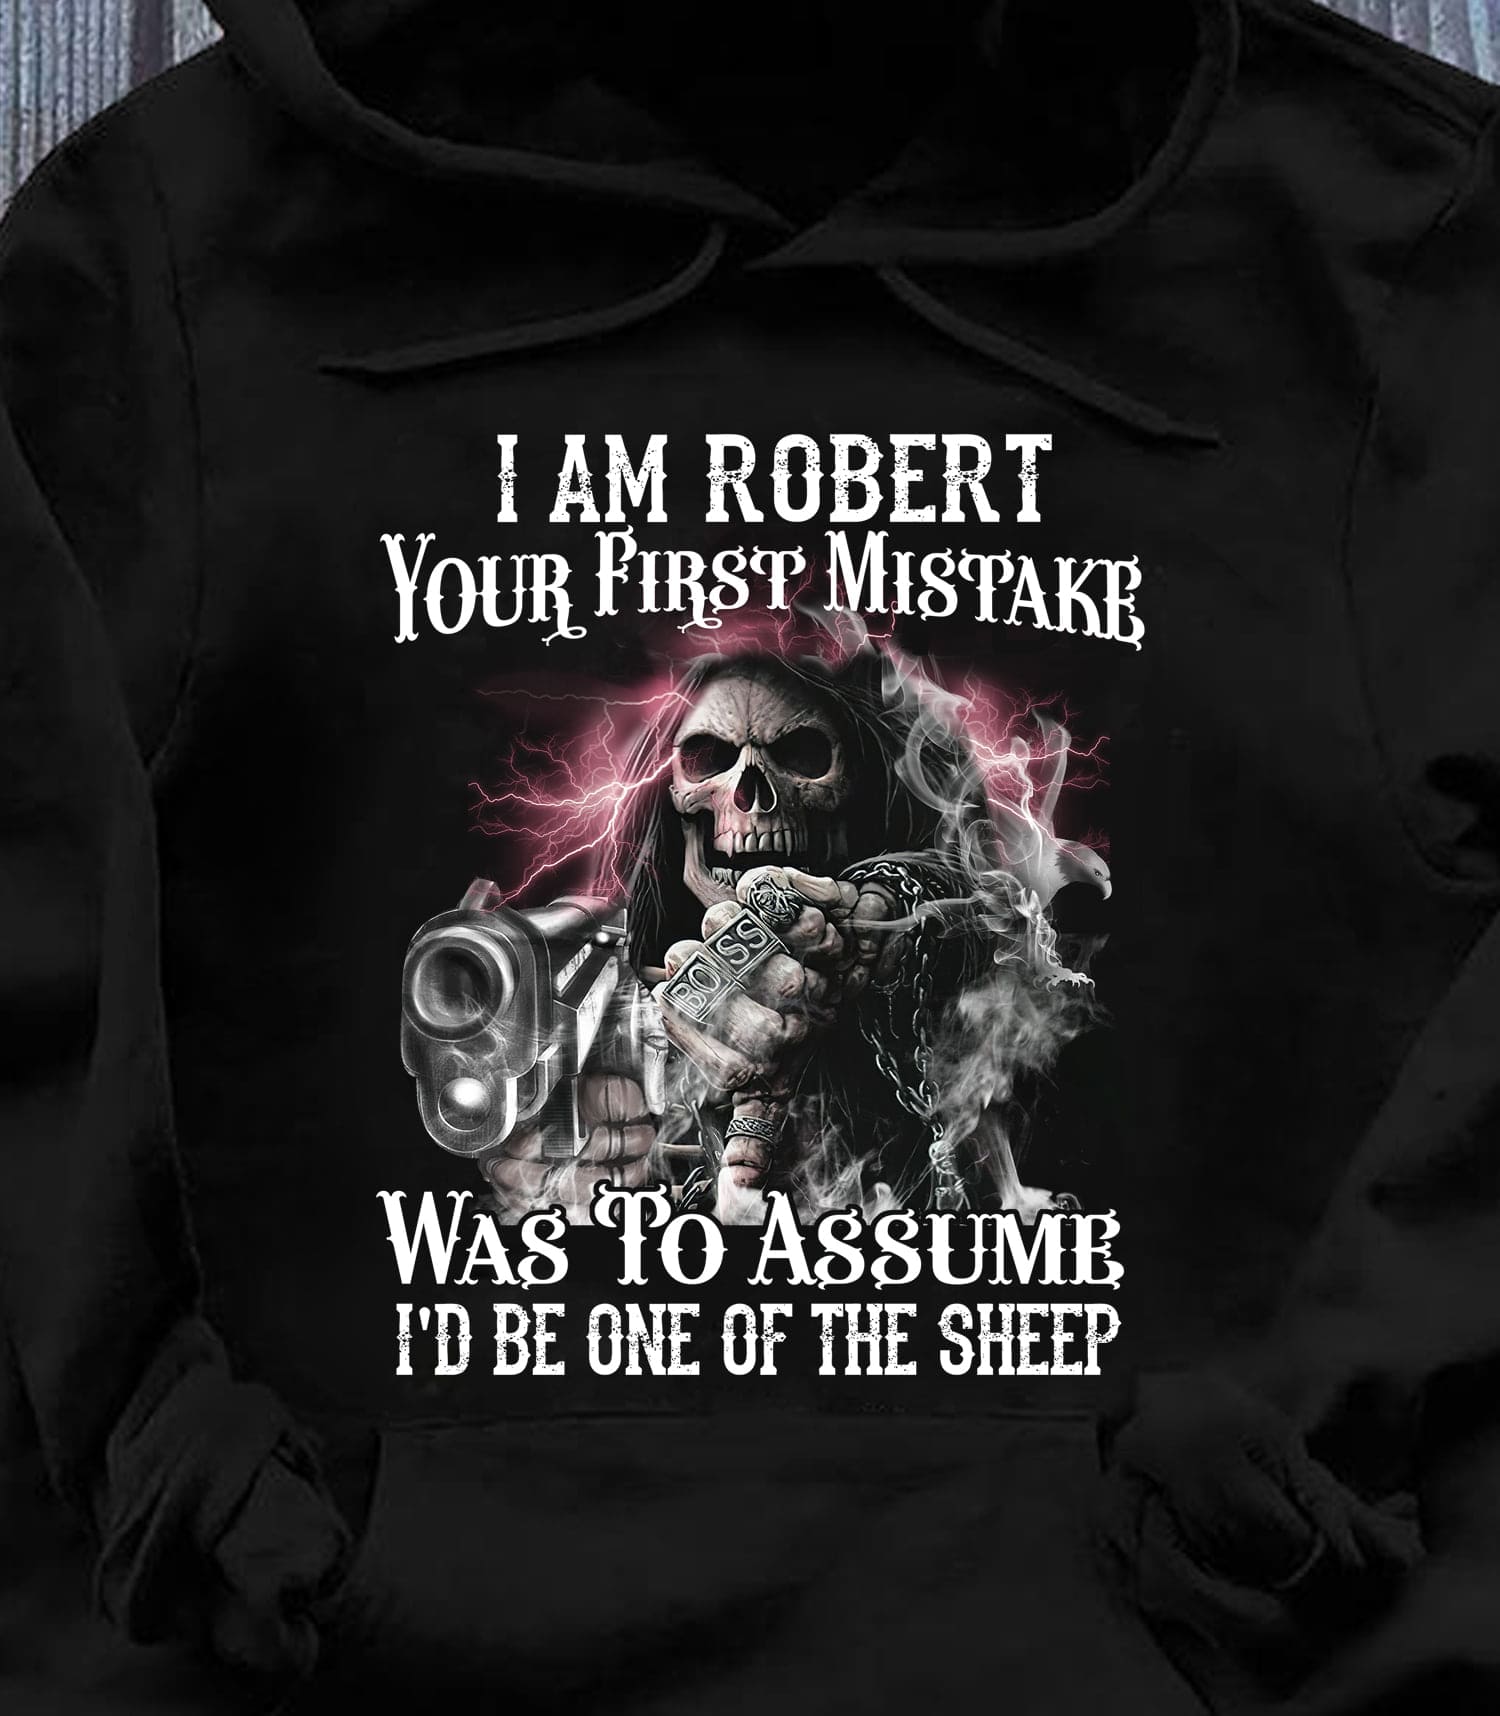 I am Robert your first mistake was to assume I'd be one of the sheep - Gift for Robert, Devil of the death